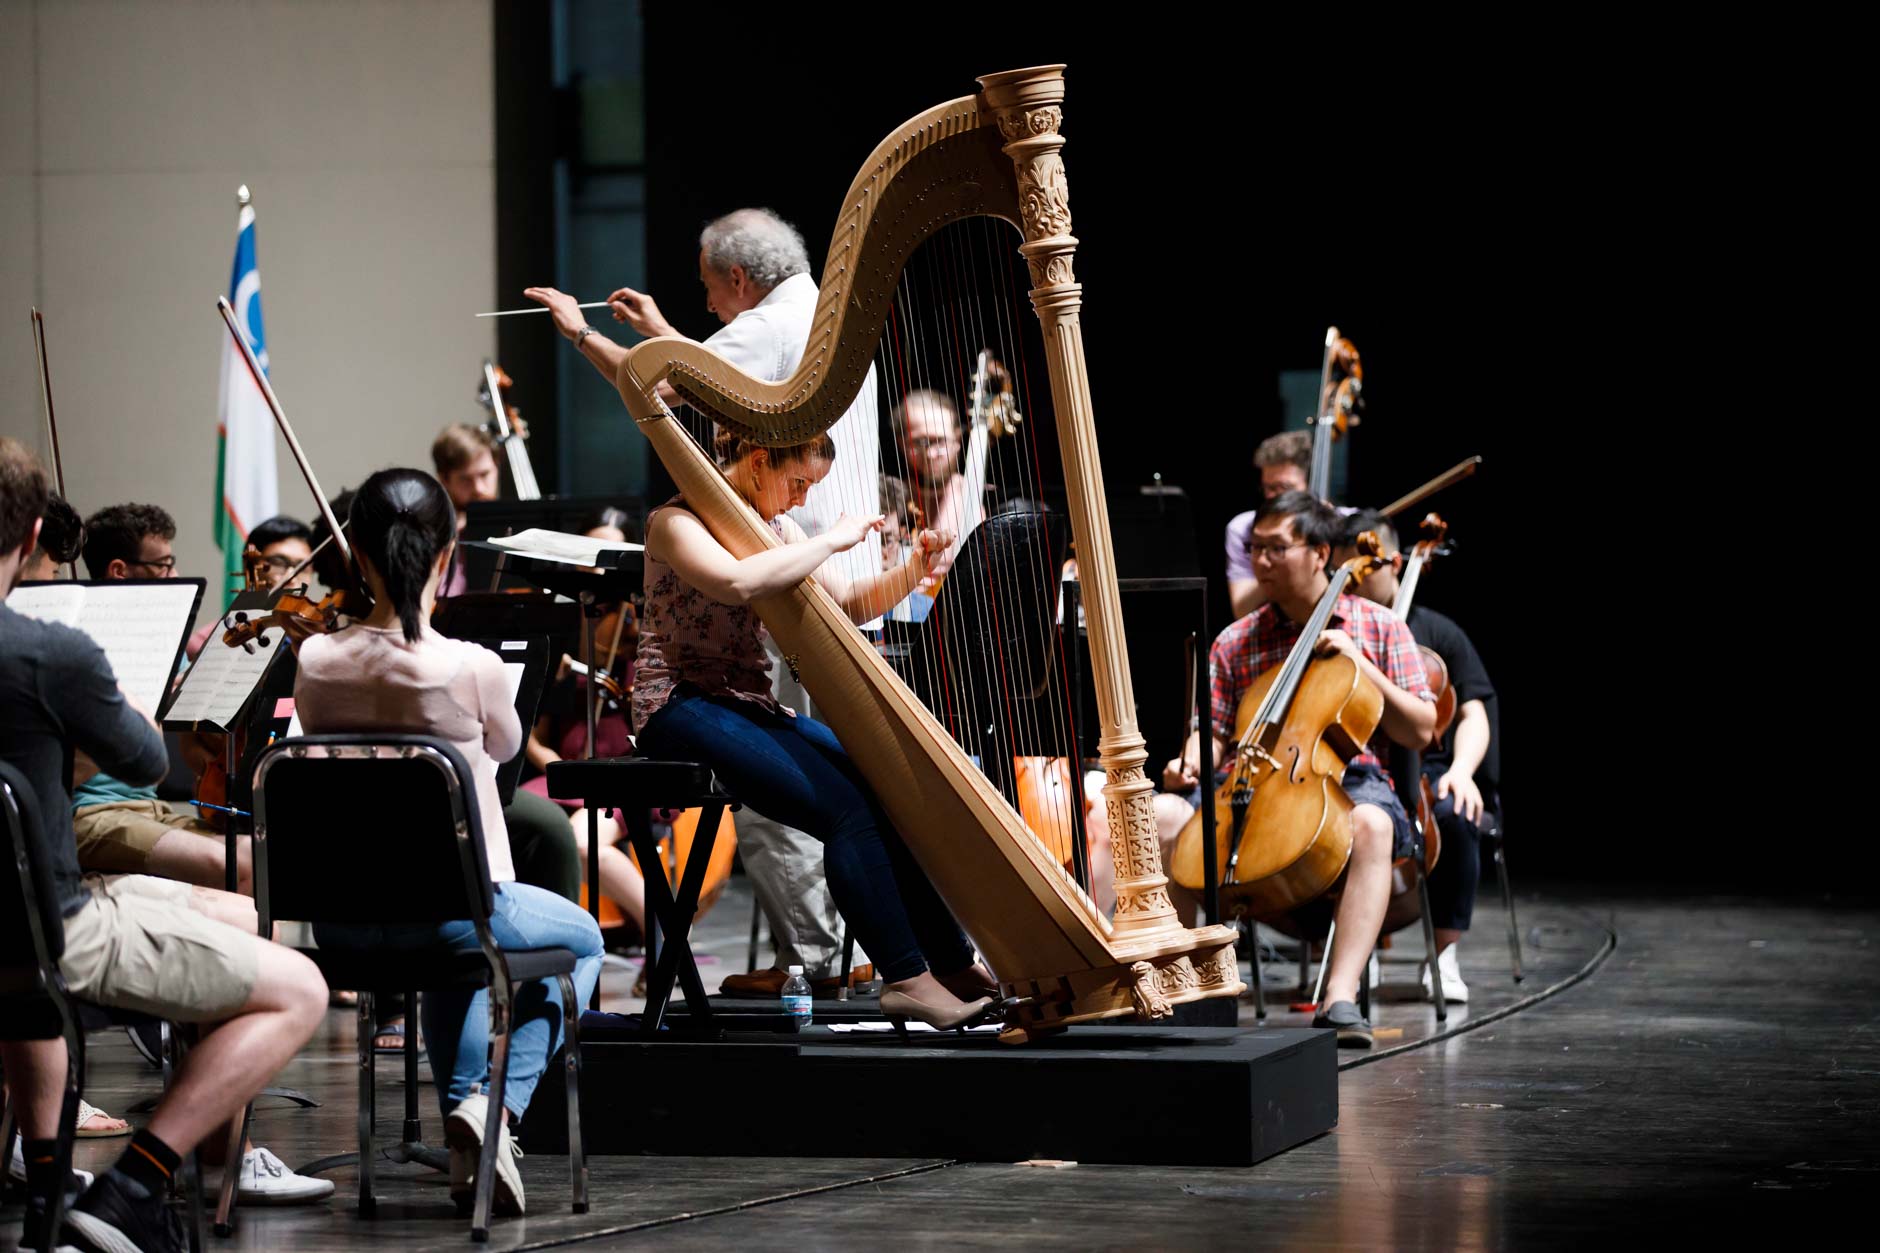 Melanie Laurent from France performs during an orchestra rehearsal for the Final Stage concert at the 11th USA International Harp Competition at Indiana University in Bloomington, Indiana on Friday, July 12, 2019. (Photo by James Brosher)